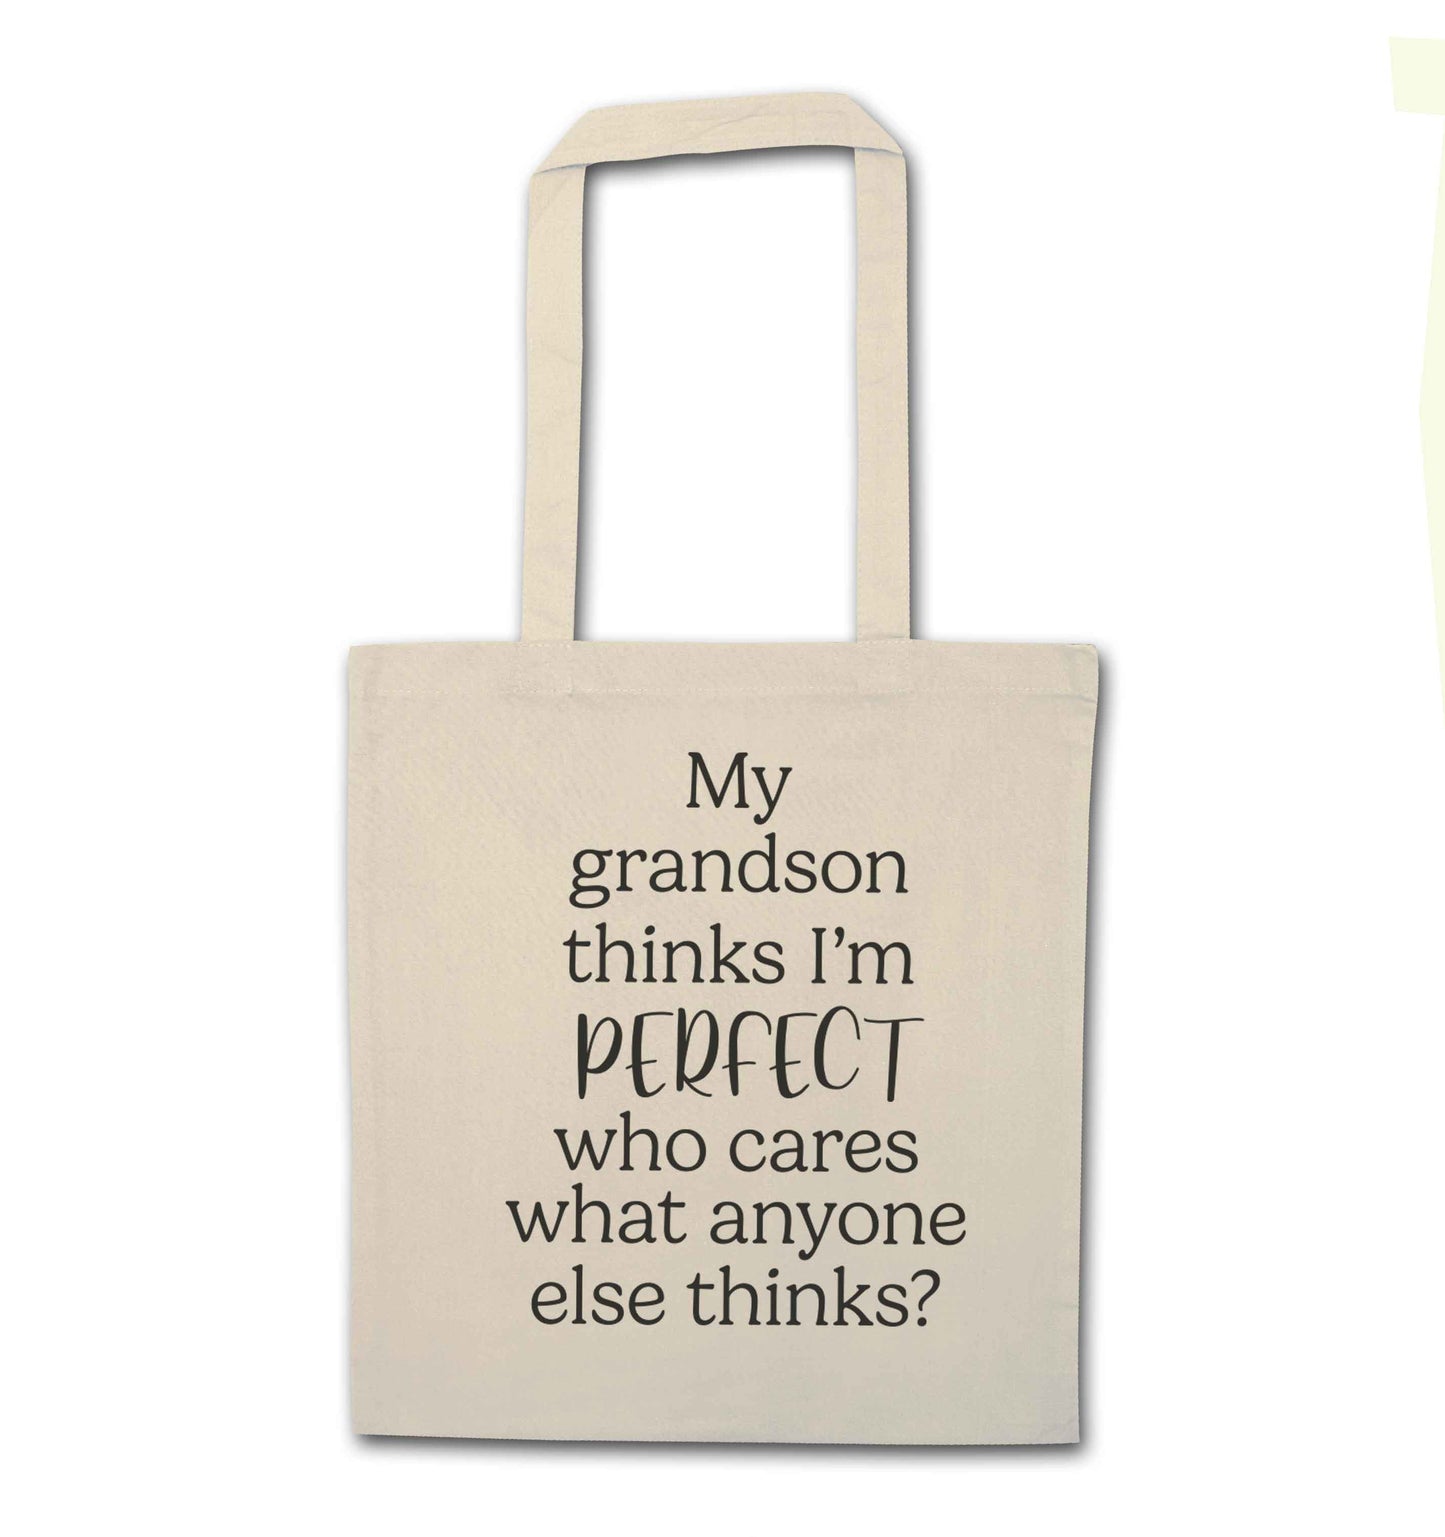 My Grandson thinks I'm perfect who cares what anyone else thinks? natural tote bag